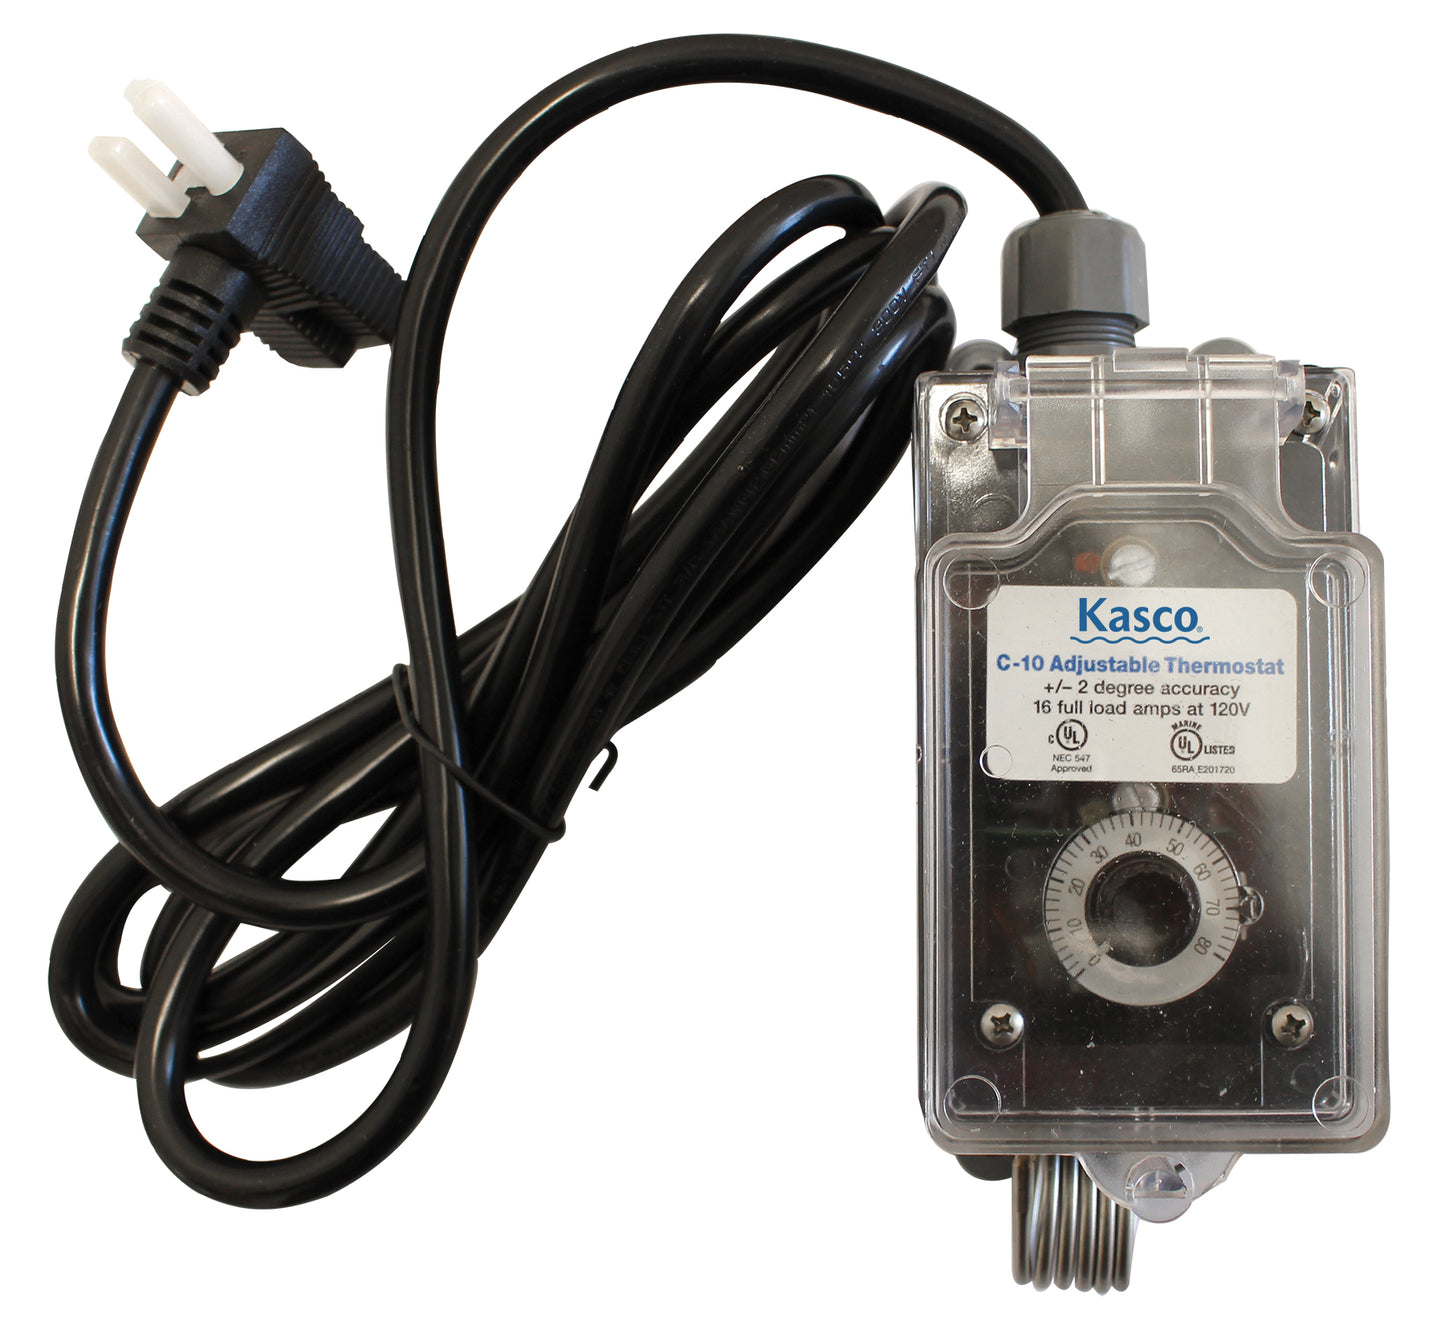 Kasco De-Icer and AquatiClear Accessories